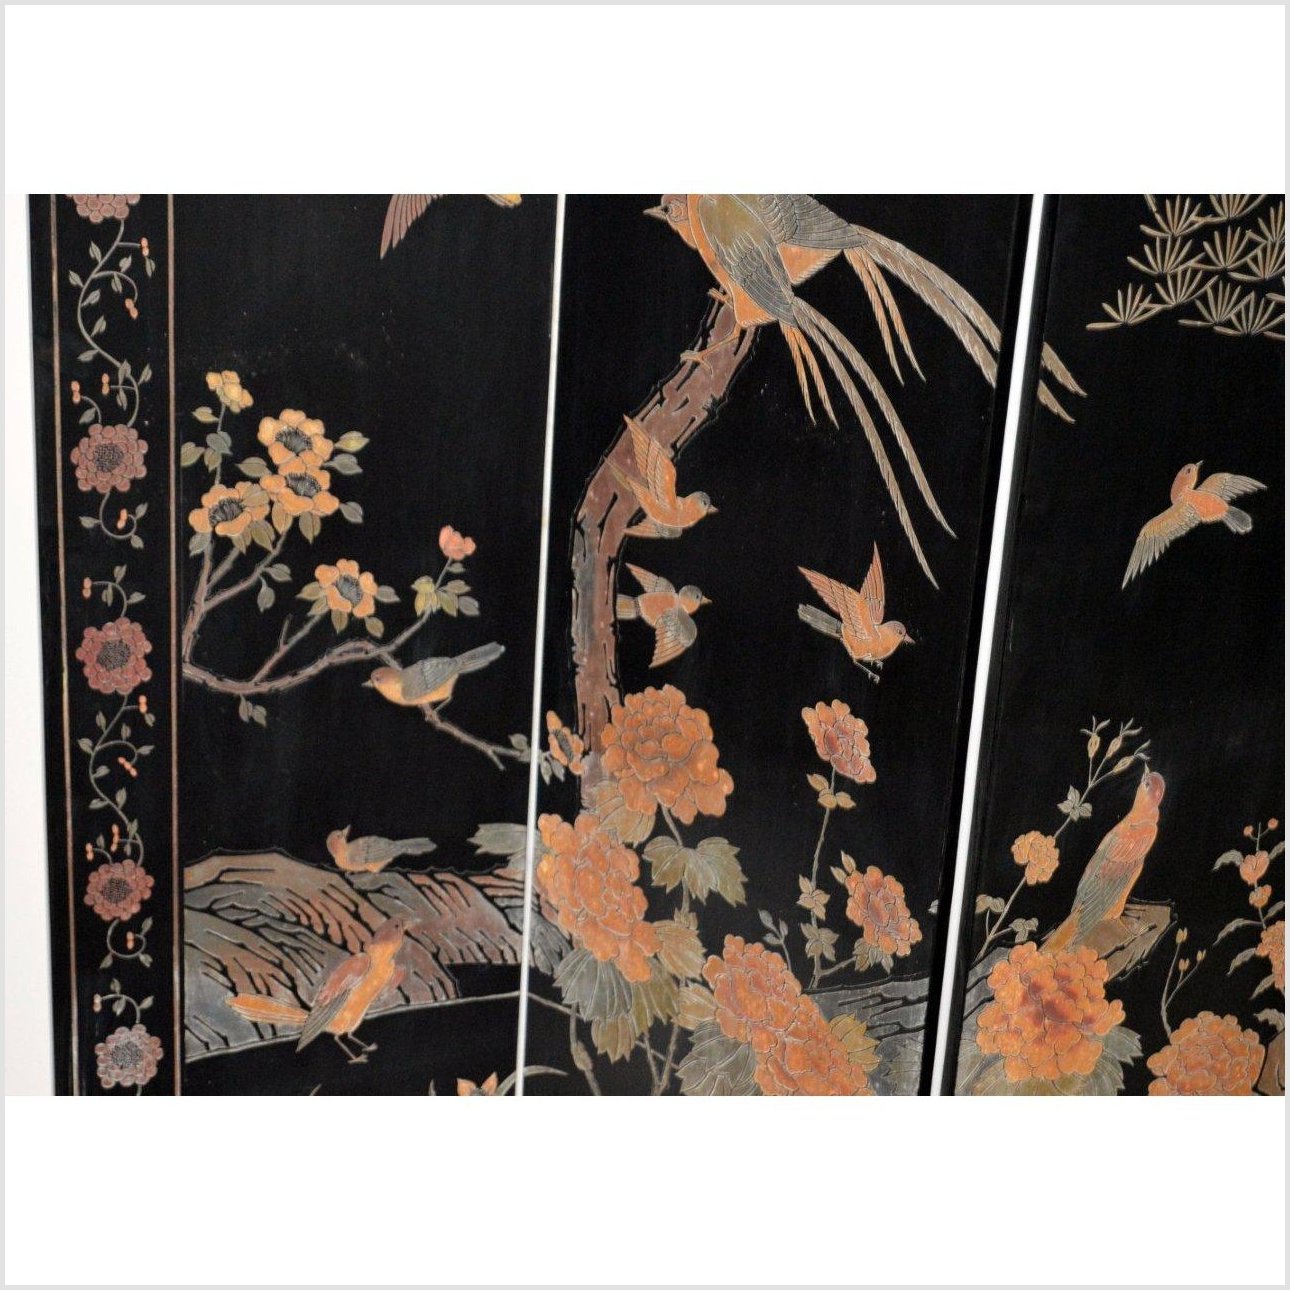 4-Panel Black Screen Designed with Trees, Birds and Flowers-YN2889-8. Asian & Chinese Furniture, Art, Antiques, Vintage Home Décor for sale at FEA Home